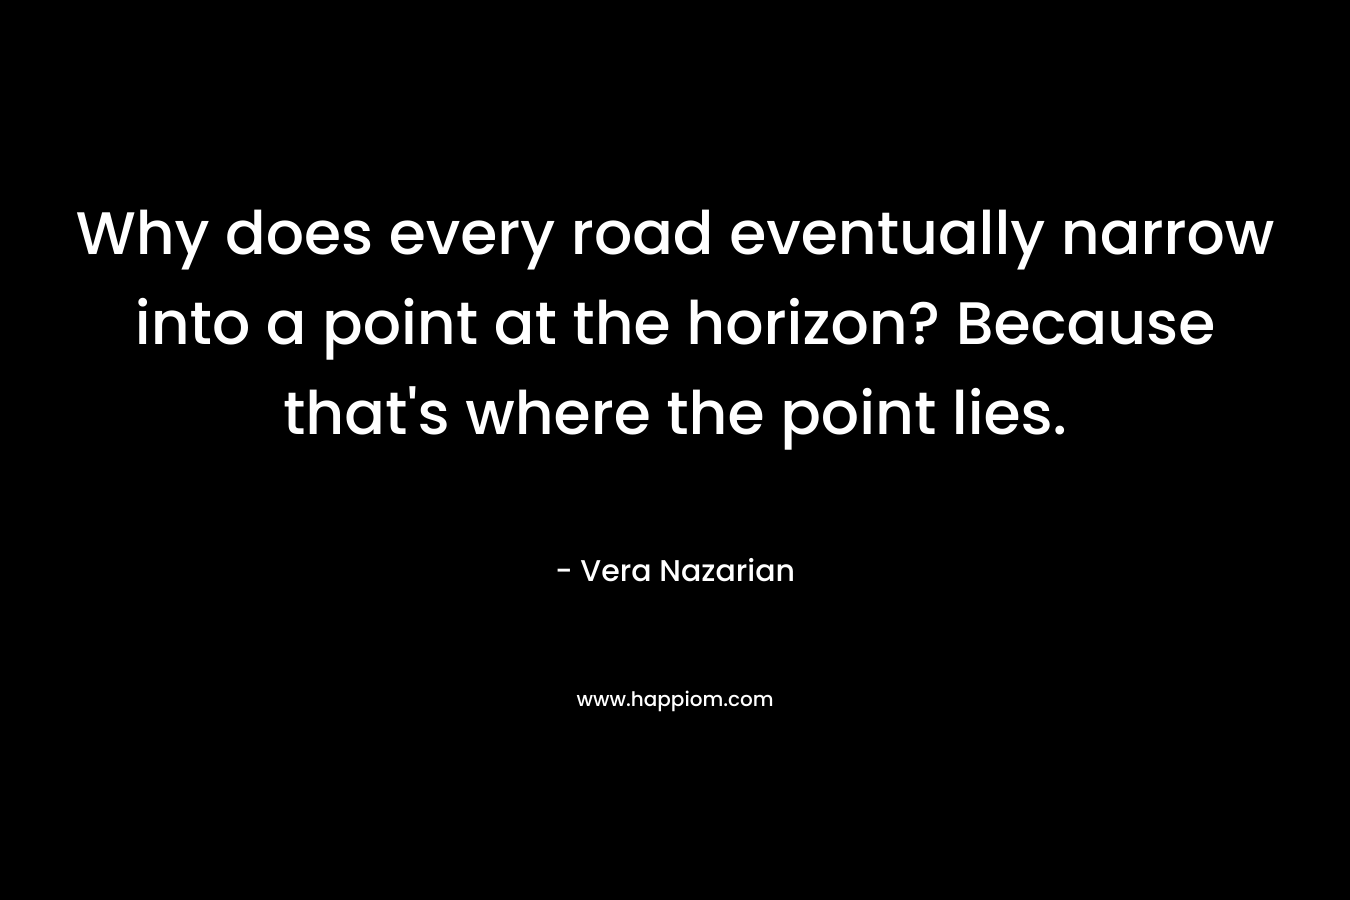 Why does every road eventually narrow into a point at the horizon? Because that's where the point lies.